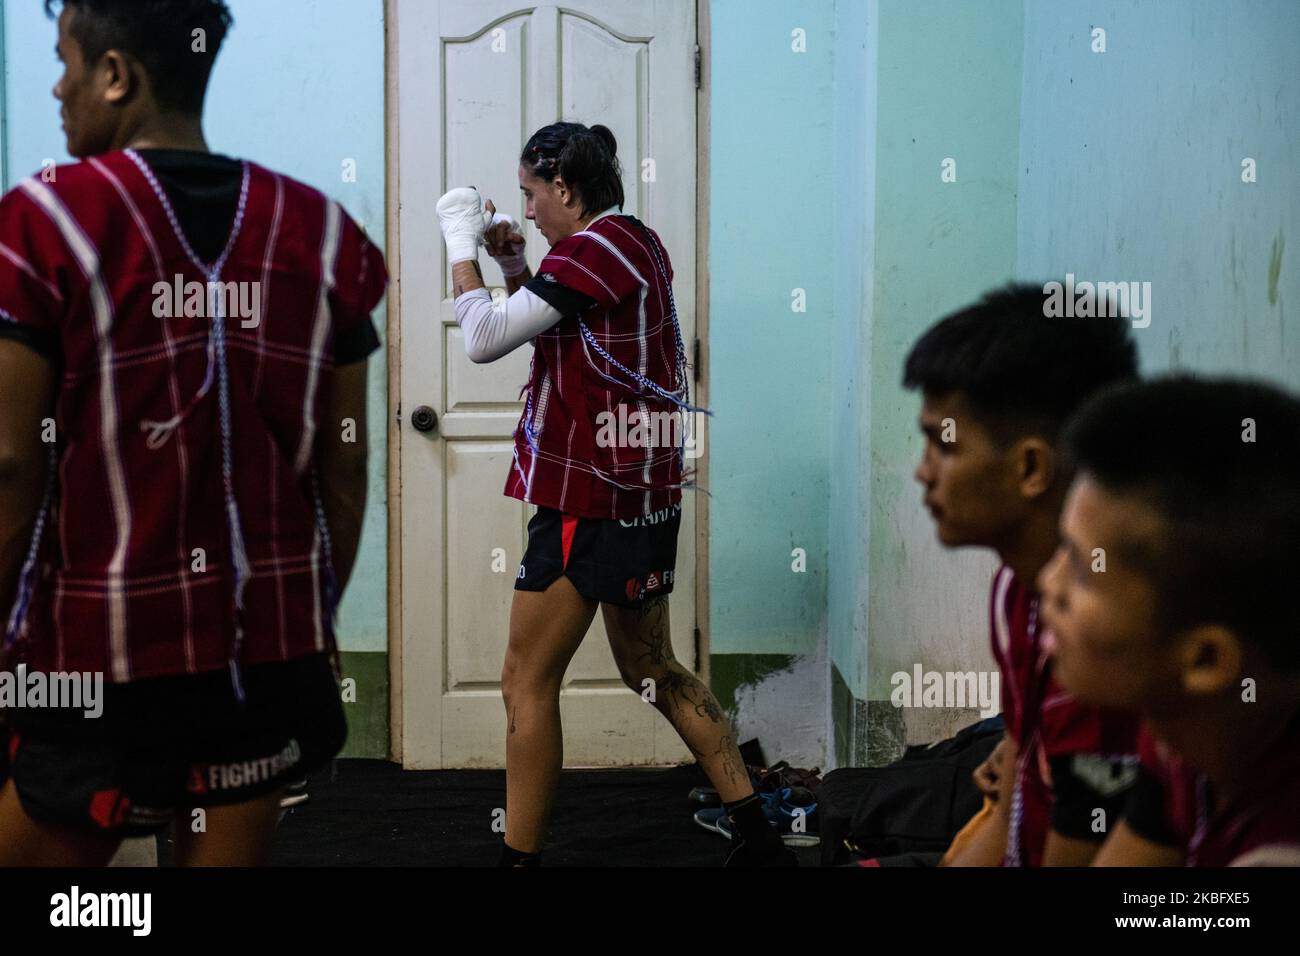 Souris Manfredi of France warm up before her fight during World Lethwei Championship in Yangon, Myanmar on January 31, 2020. (Photo by Shwe Paw Mya Tin/NurPhoto) Stock Photo